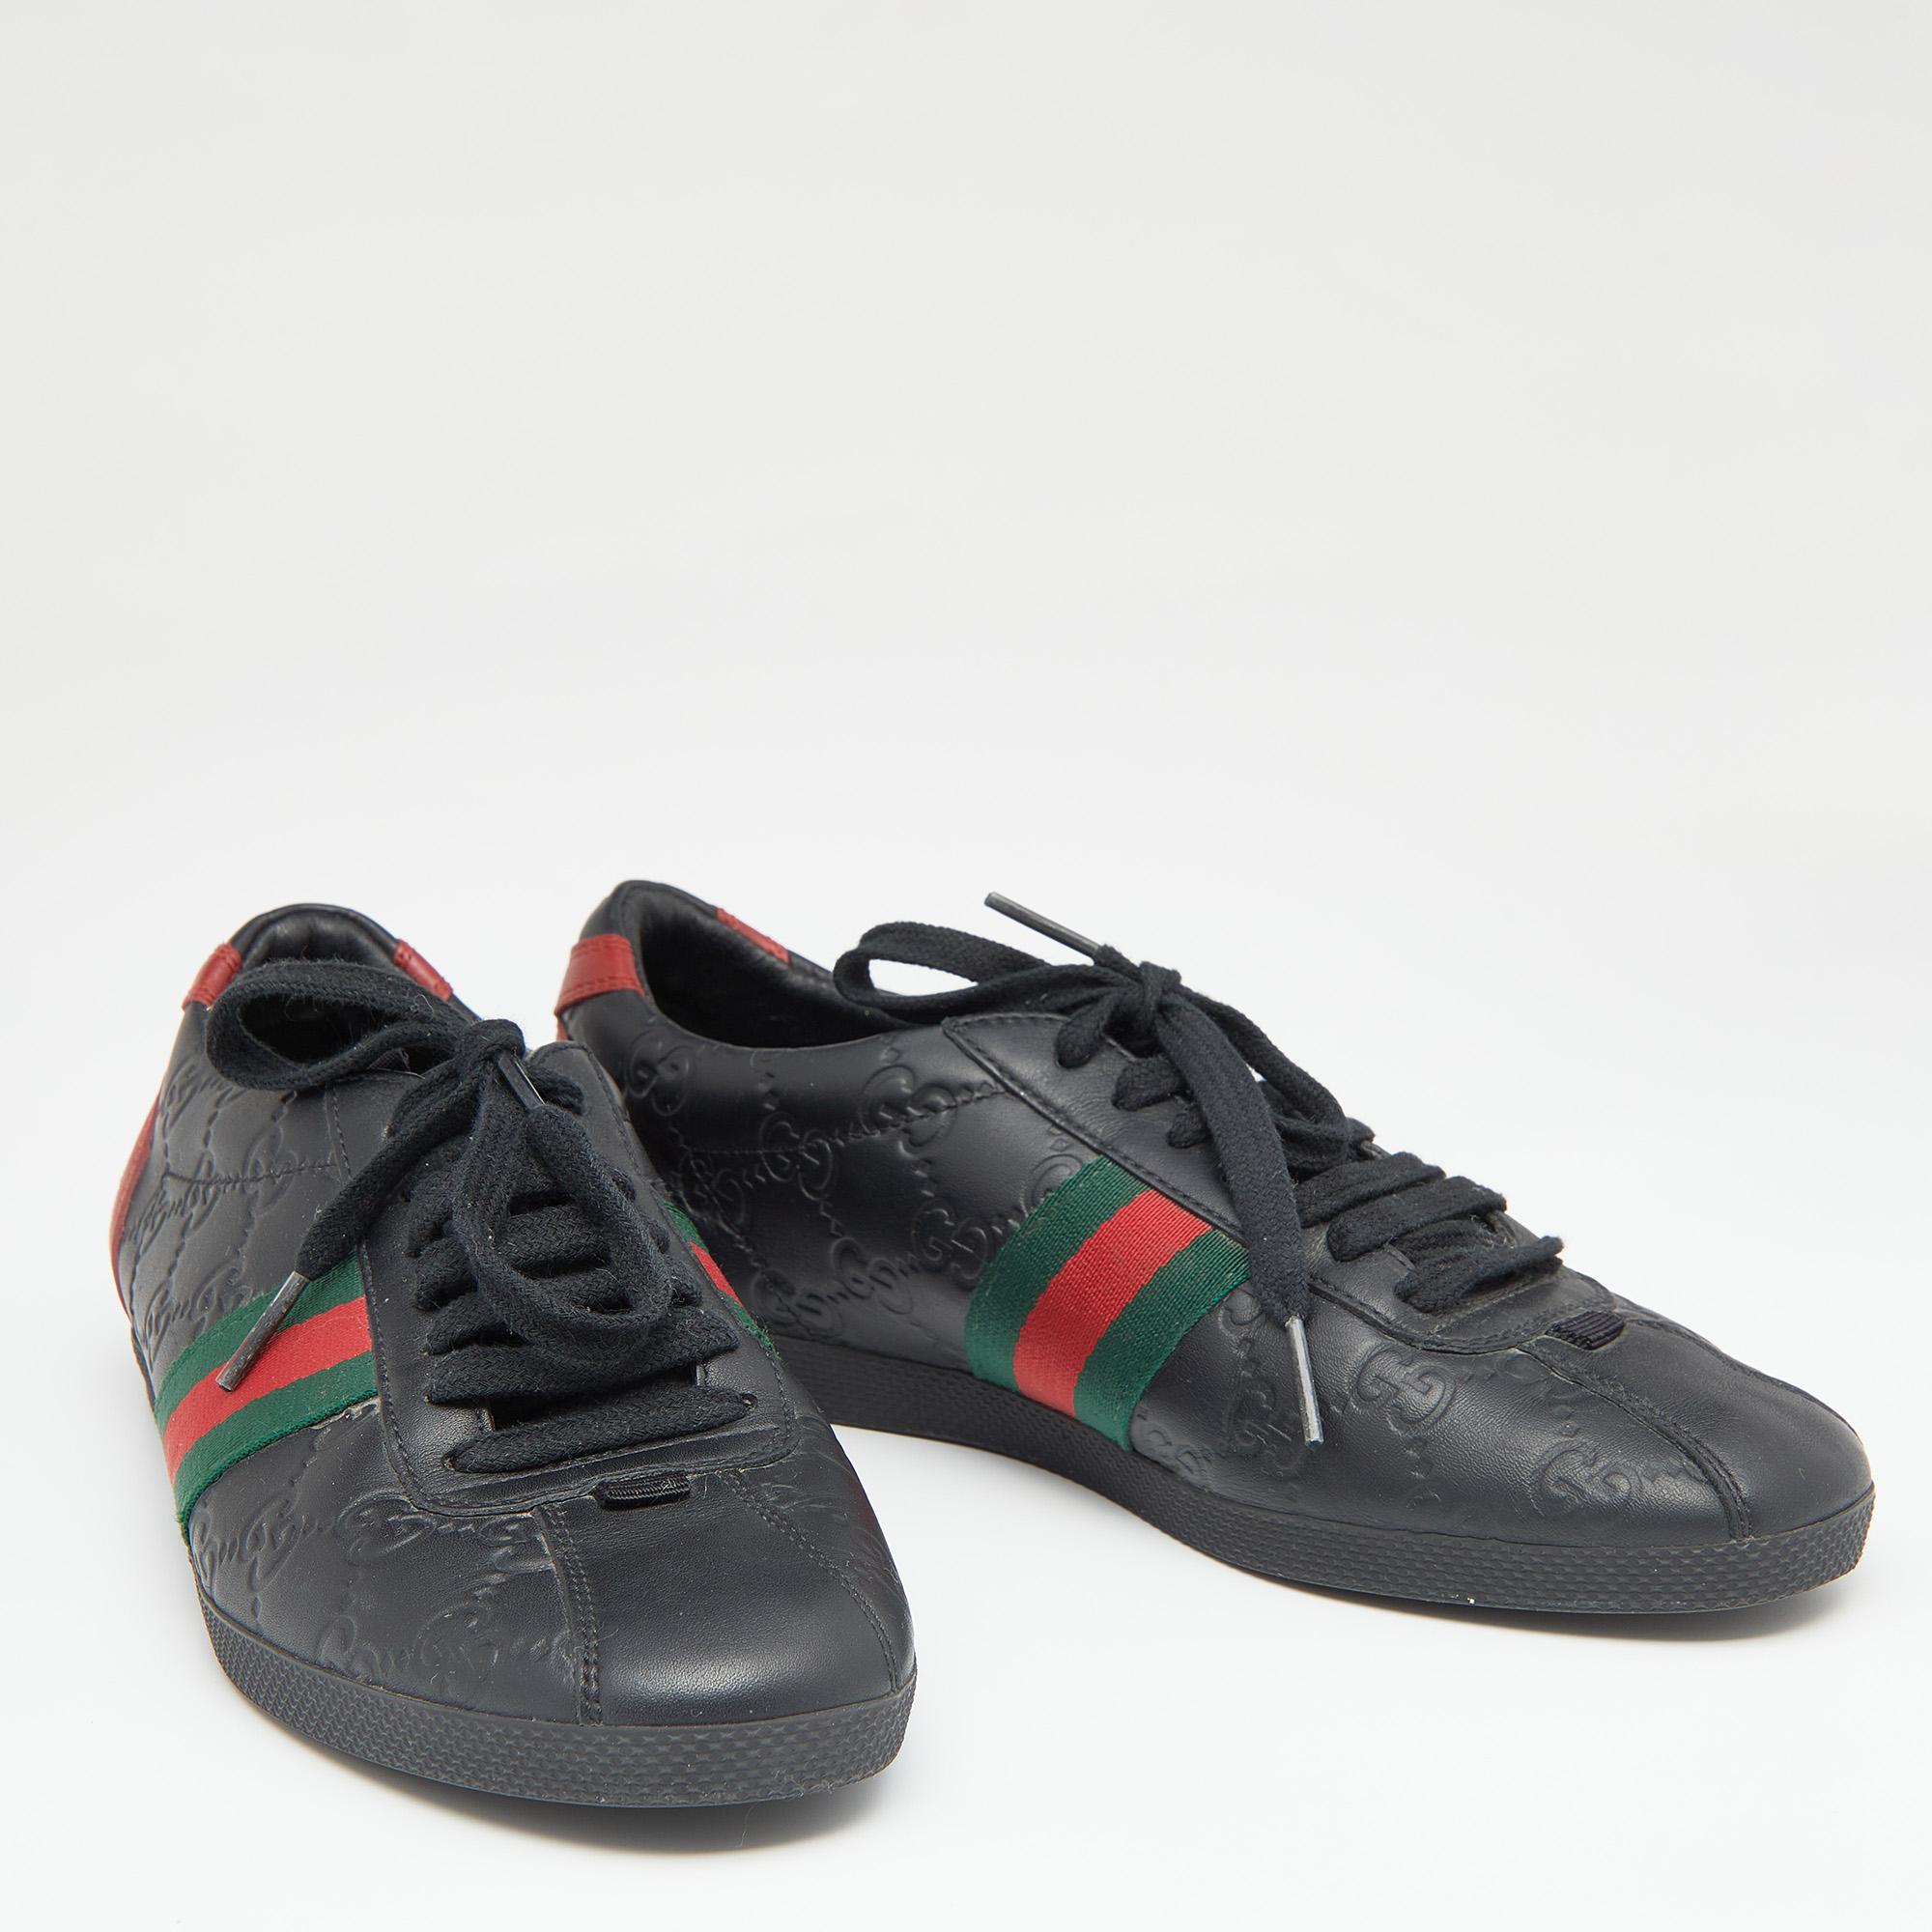 Gucci Black Guccissima Leather Web Low Top Sneakers Size 37 1